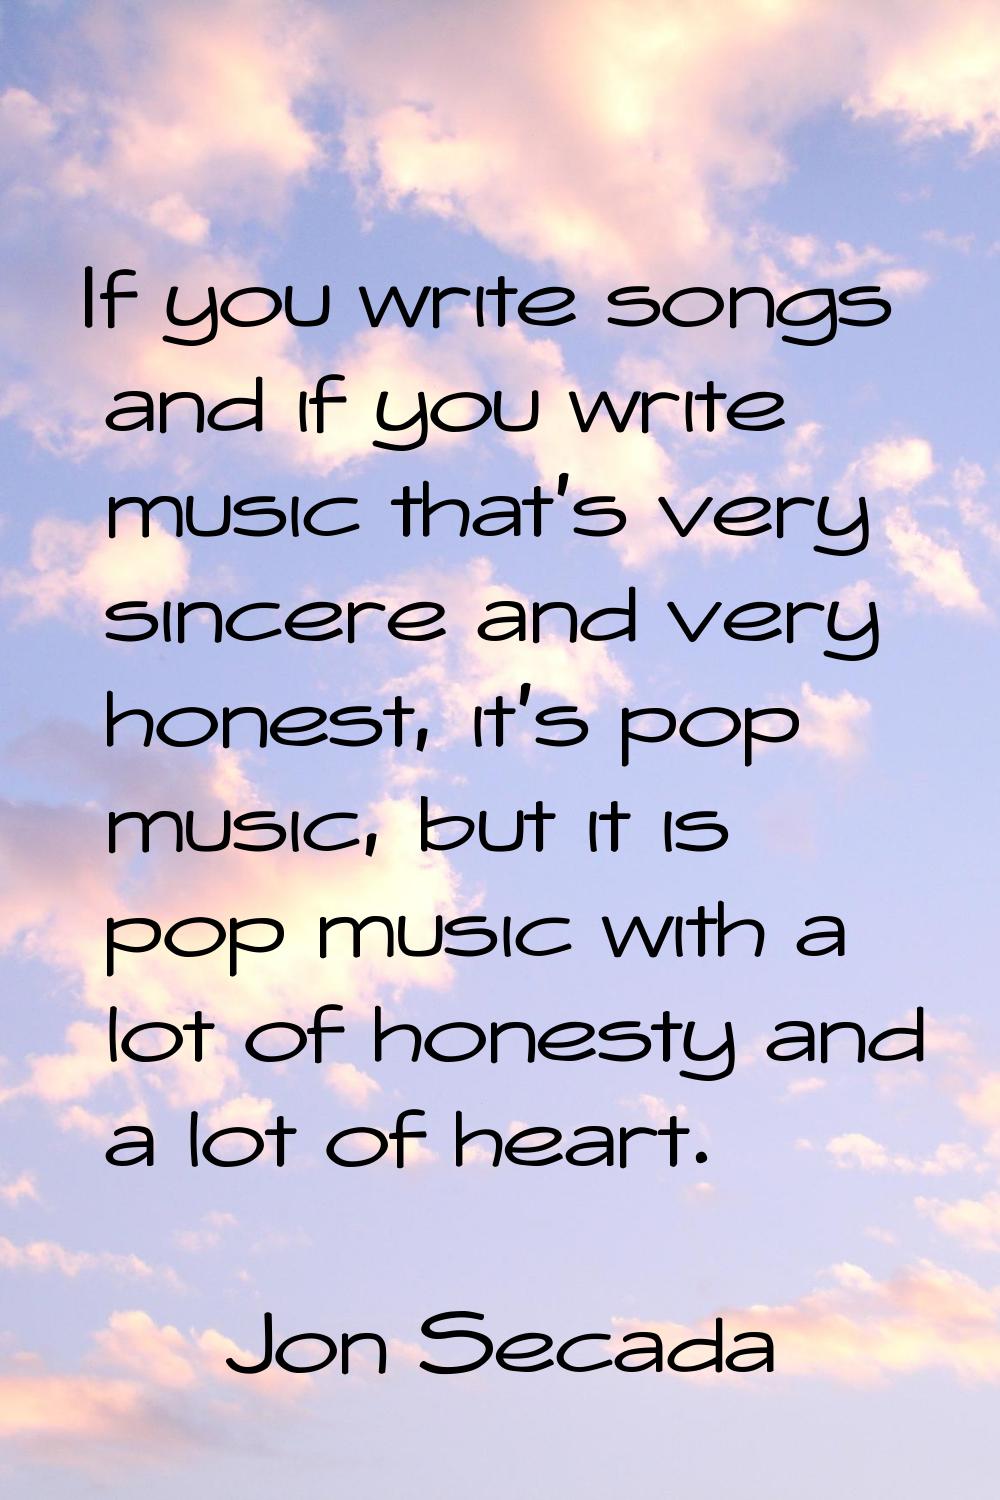 If you write songs and if you write music that's very sincere and very honest, it's pop music, but 